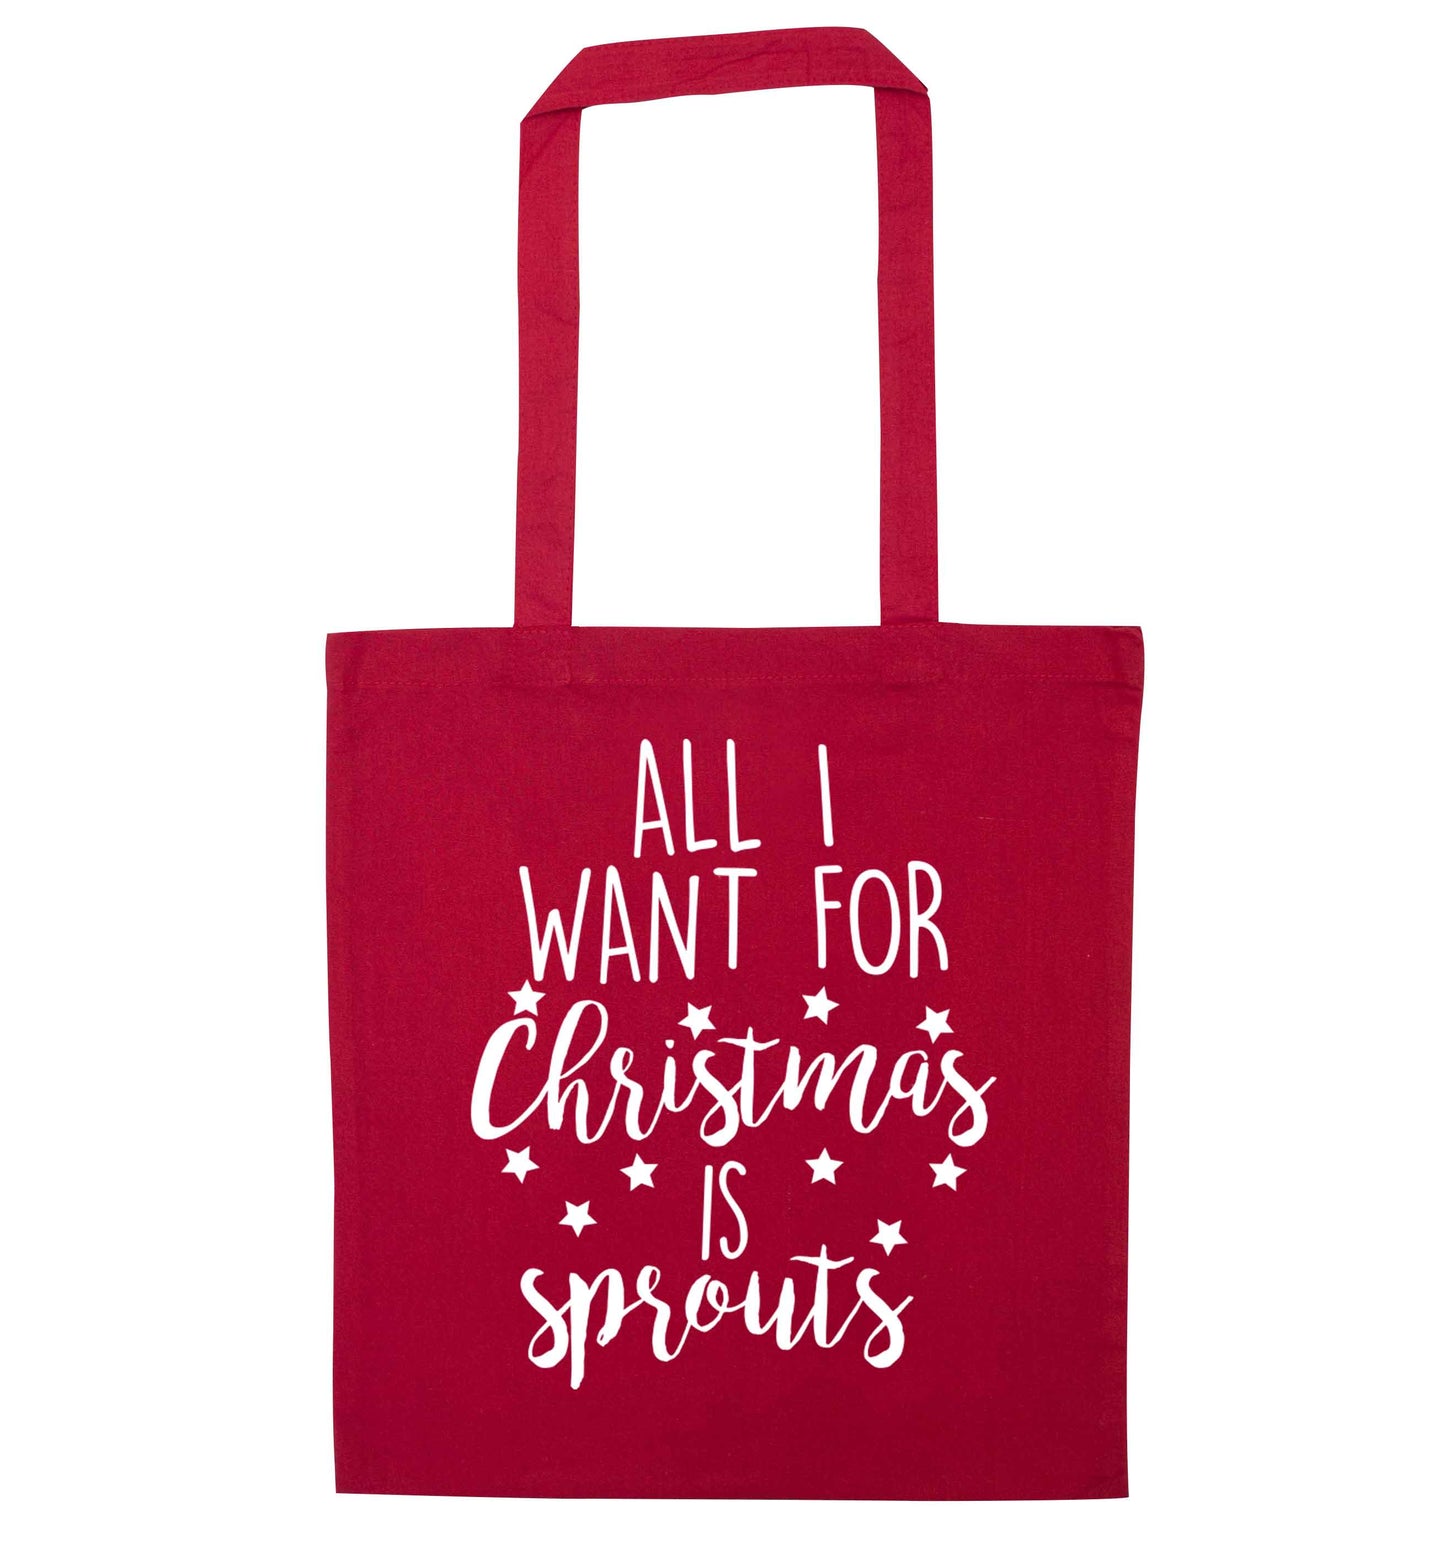 All I want for Christmas is sprouts red tote bag